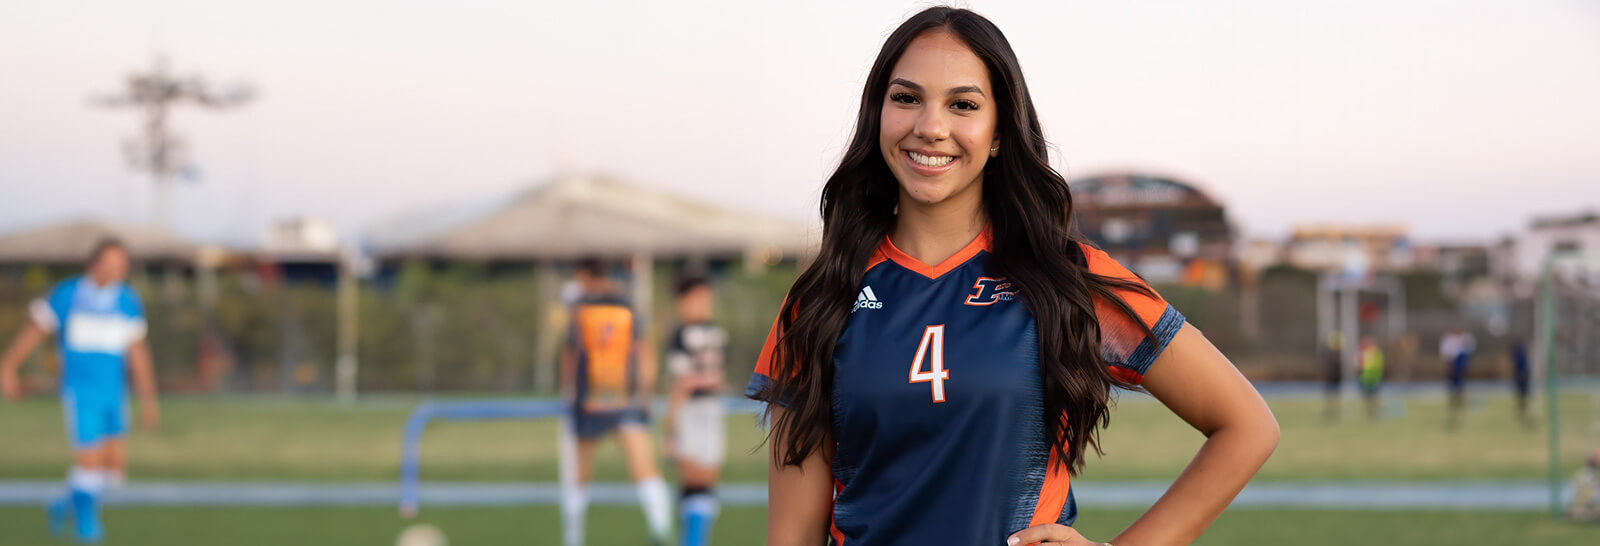 Gabi Amparano poses for the camera at the PCC soccer field.